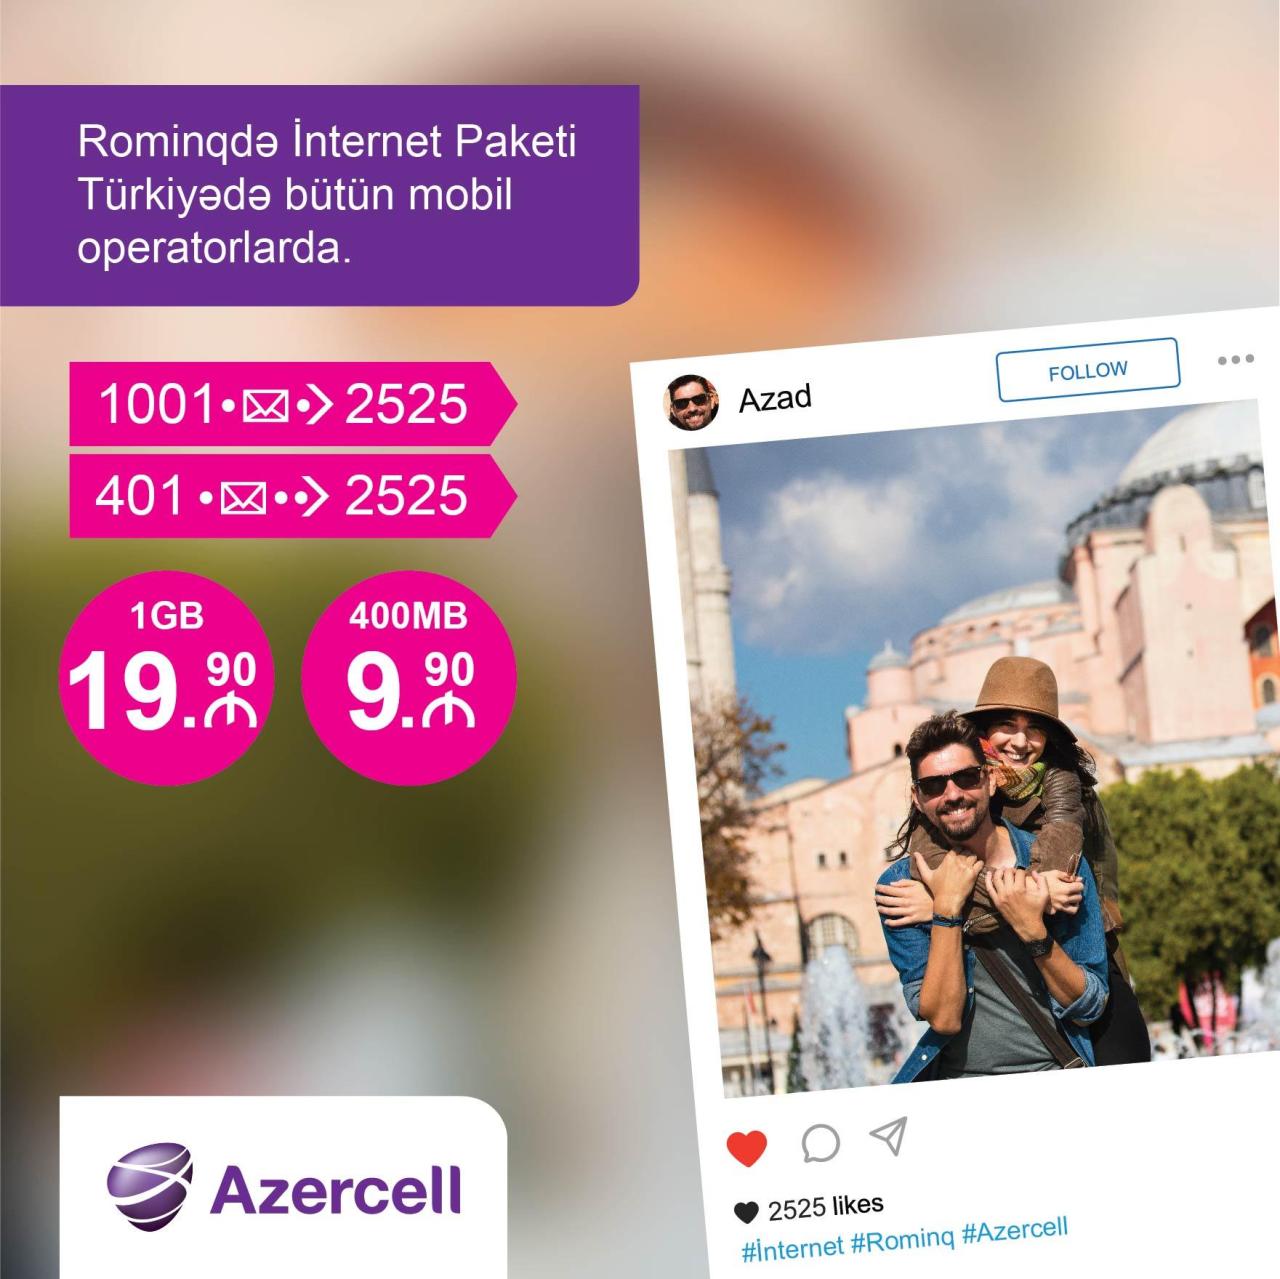 Azercell continues to delight its subscribers with roaming services